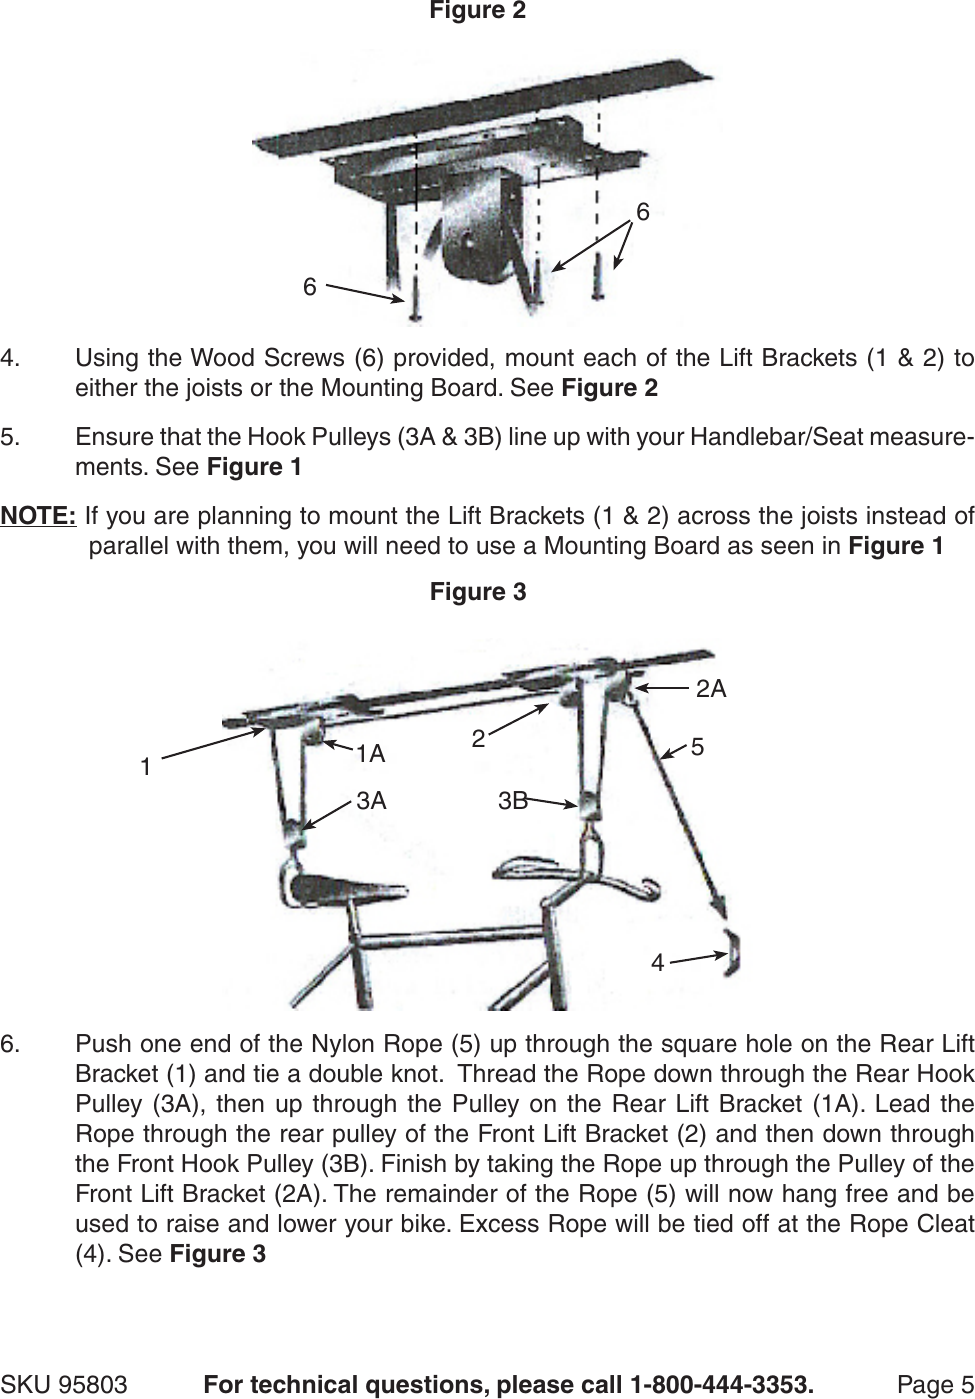 Page 5 of 8 - Harbor-Freight Harbor-Freight-Bicycle-Lift-Product-Manual-  Harbor-freight-bicycle-lift-product-manual